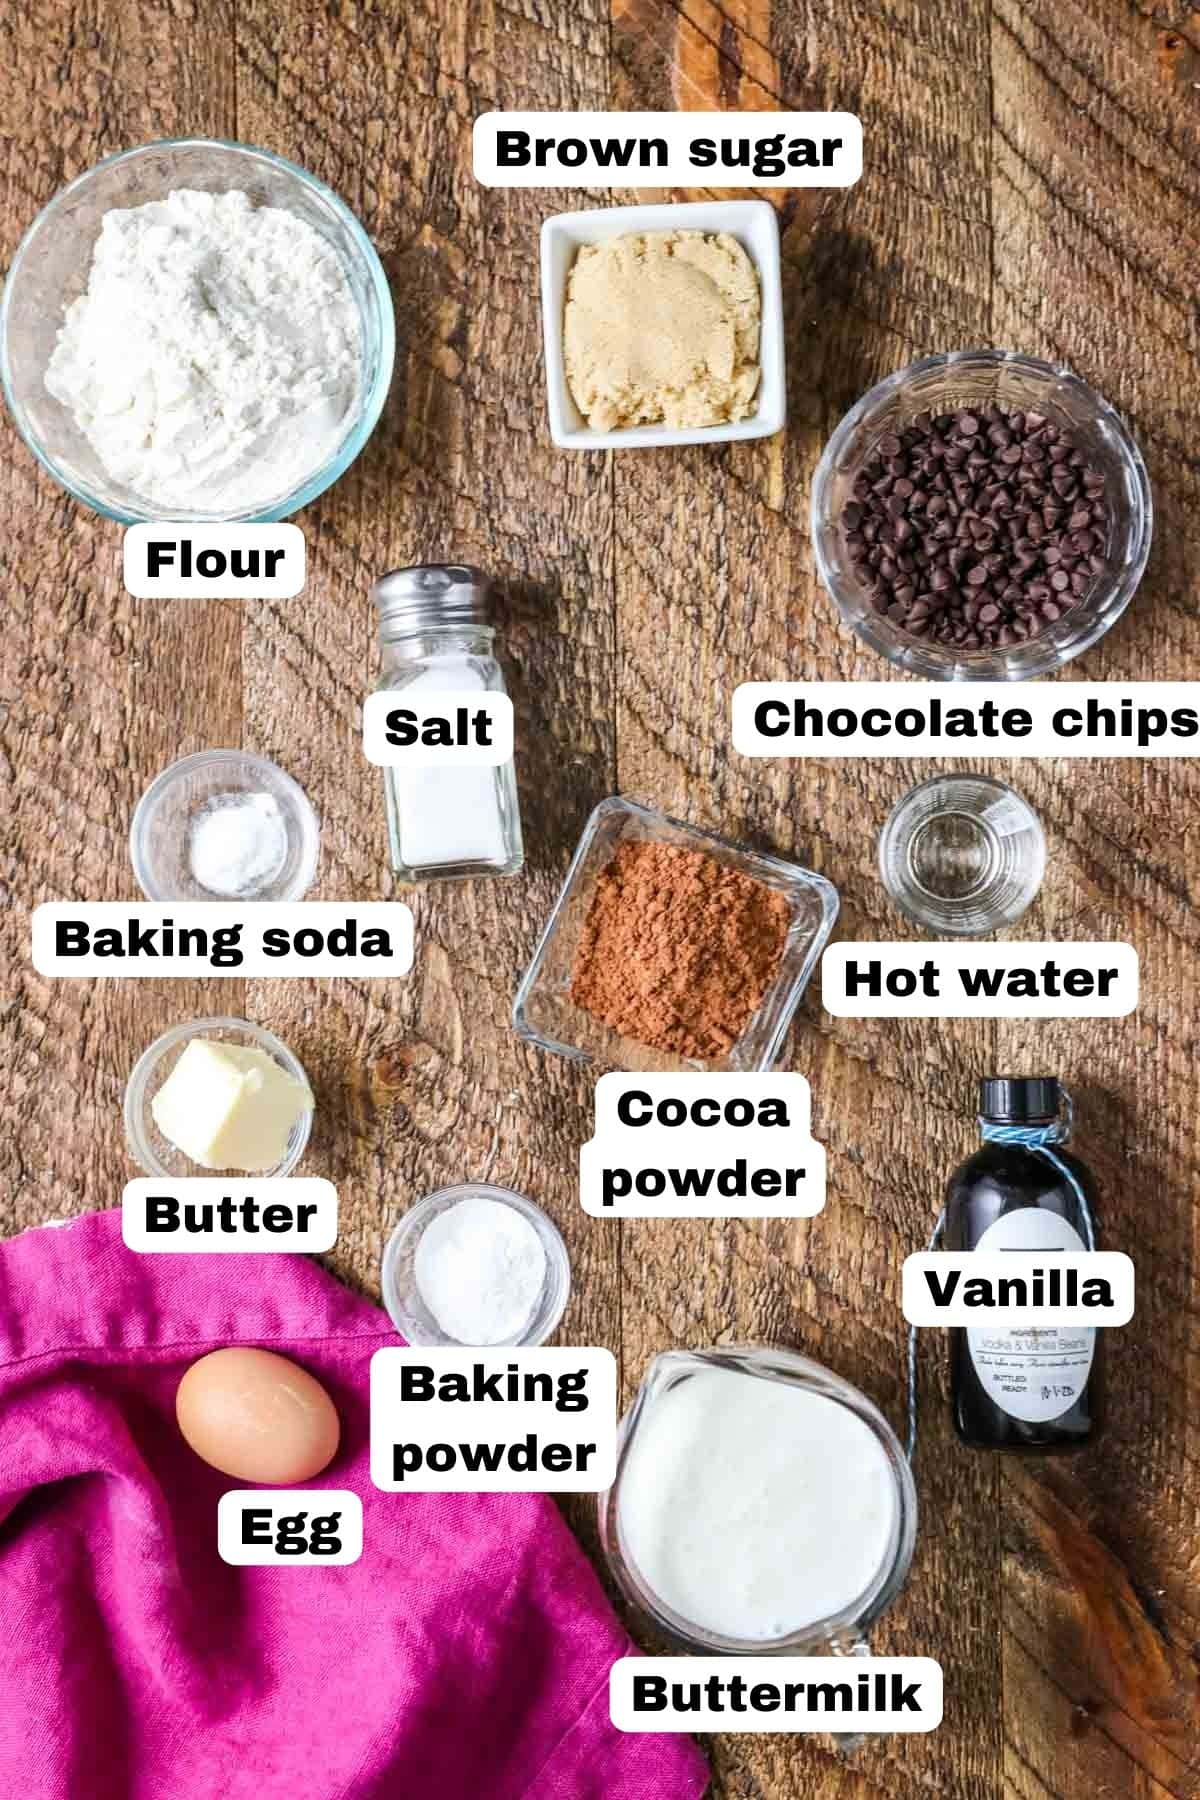 Overhead view of ingredients including cocoa powder, buttermilk, brown sugar, and more.